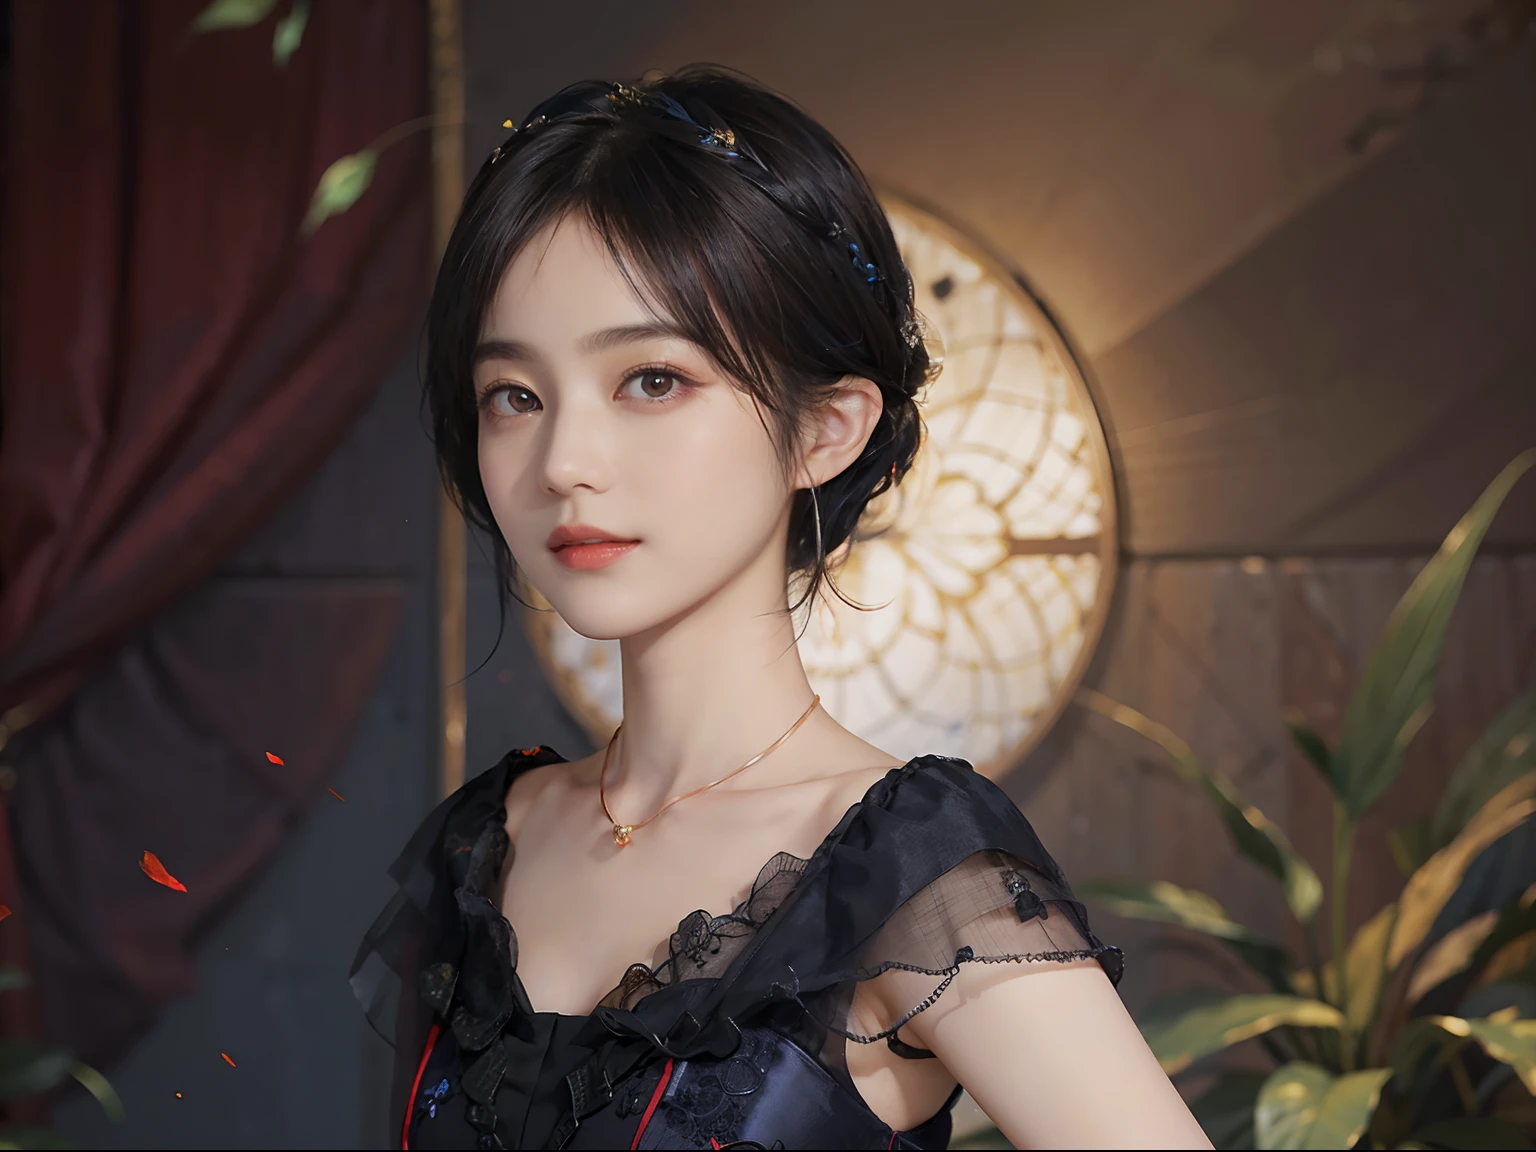 ((1womanl)),  (((Black-short-hair))), （masuter piece：1,3）、top-quality、​masterpiece、hight resolution、Original、highly detailed wallpaper、dress code、Luxurious necklace, (A slight smil)、a small face、((breast))、(Red and blue dresses)、(light on face)、Live-action style, Beautiful facial features, darkened room, ((Hu Dilan)), Masquerade